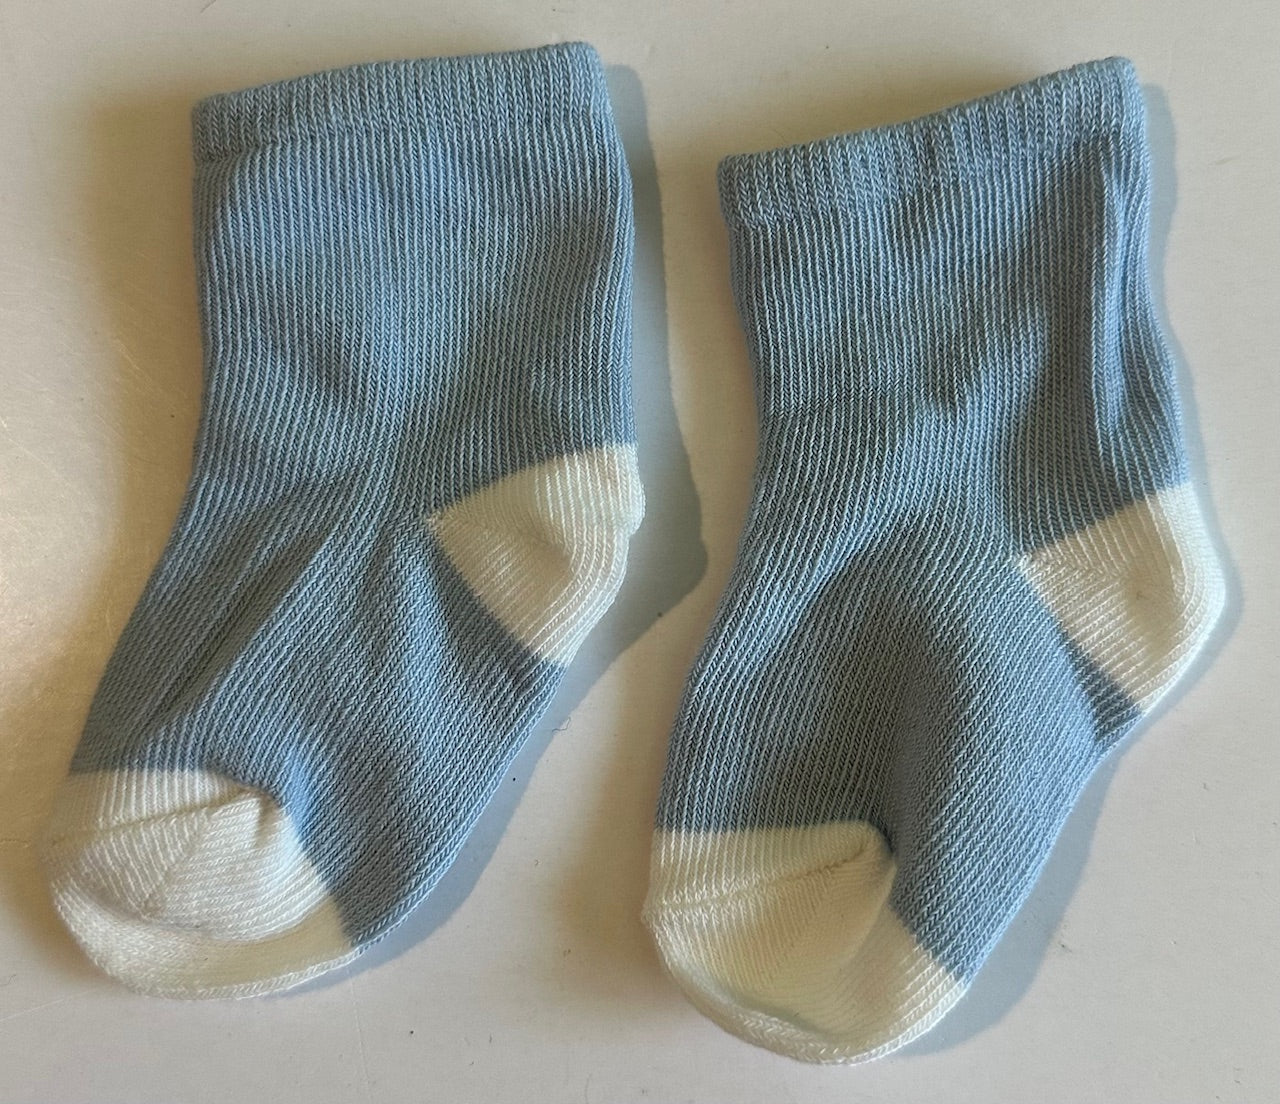 Unknown Brand, Blue and White Socks - 0-6 Months